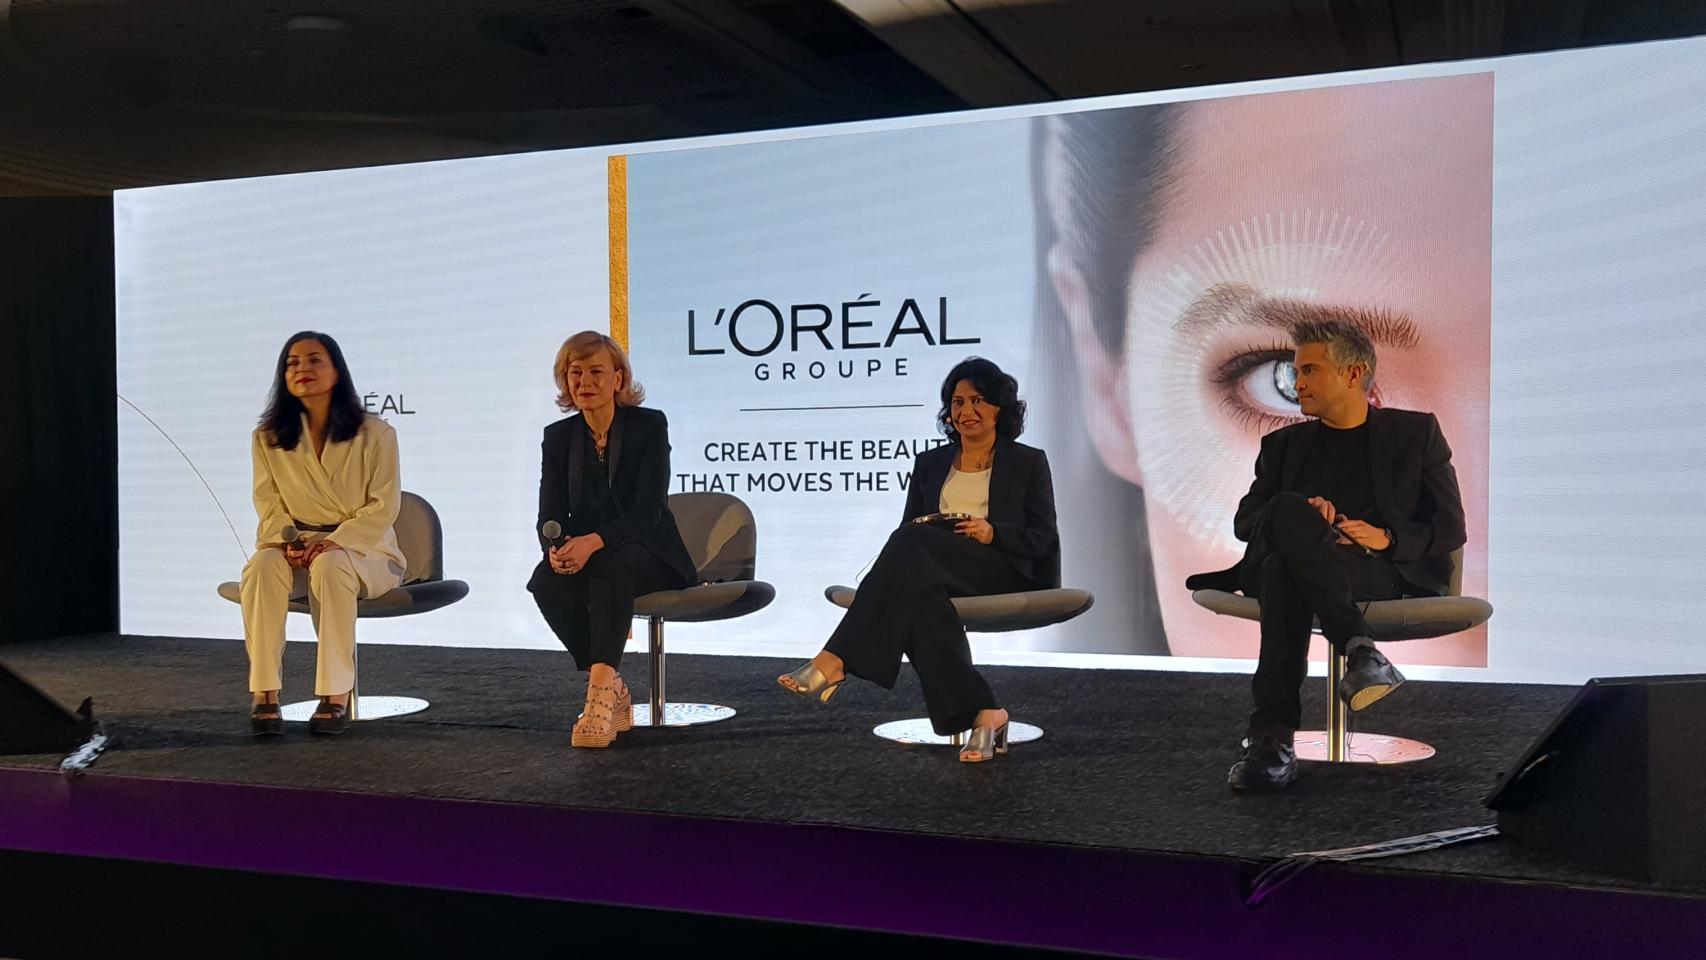 De izquierda a derecha: Blanca Juti, chief corporate Affairs and Engagement Officer L'Oréal Grup; Barbara Lavernos, deputy chief executive officer L'Oréal in charge of Research, Innovation and Technology; Asmita Dubey; chief Digital and Marketing Officer L'Oréal Groupe, y Guive Balooch, L'Oréal's Global Technology Incubator.